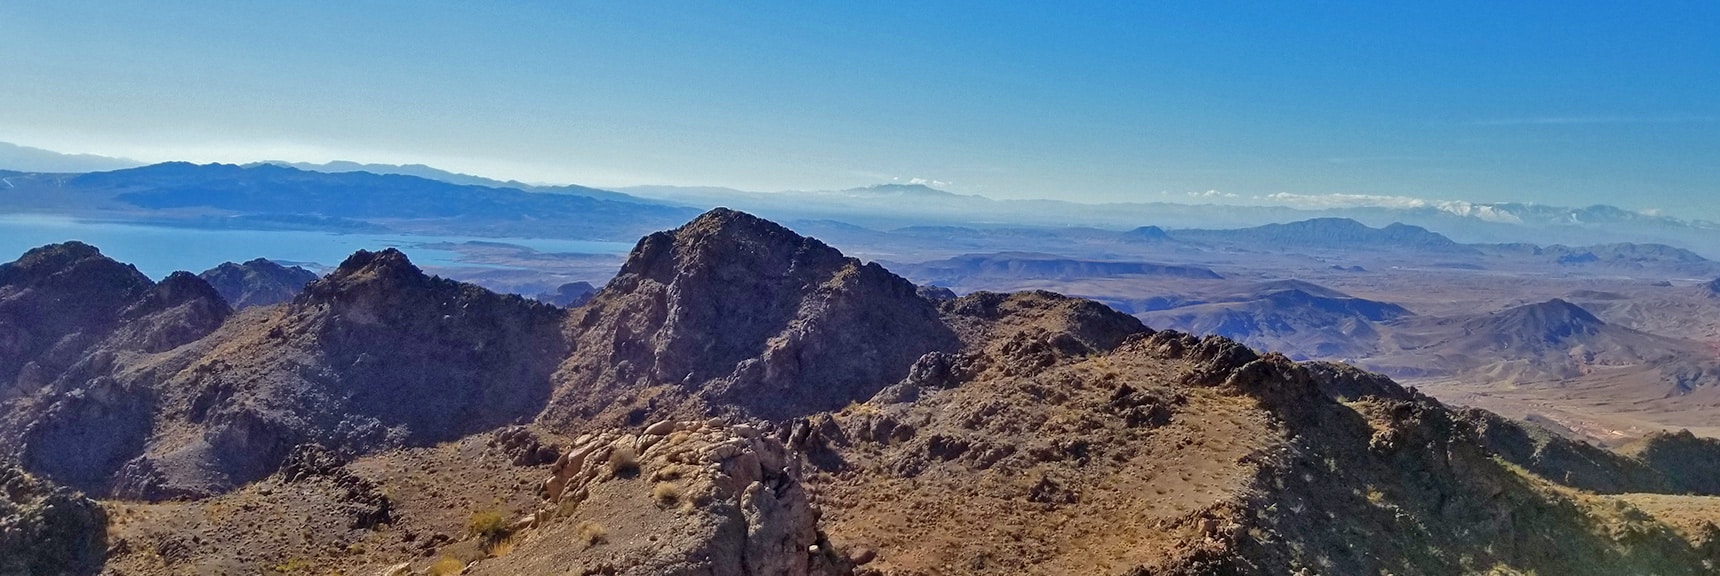 Lake Mead and Frenchman Mt Viewed from Hamblin Mt. Summit | Hamblin Mountain, Lake Mead National Conservation Area, Nevada